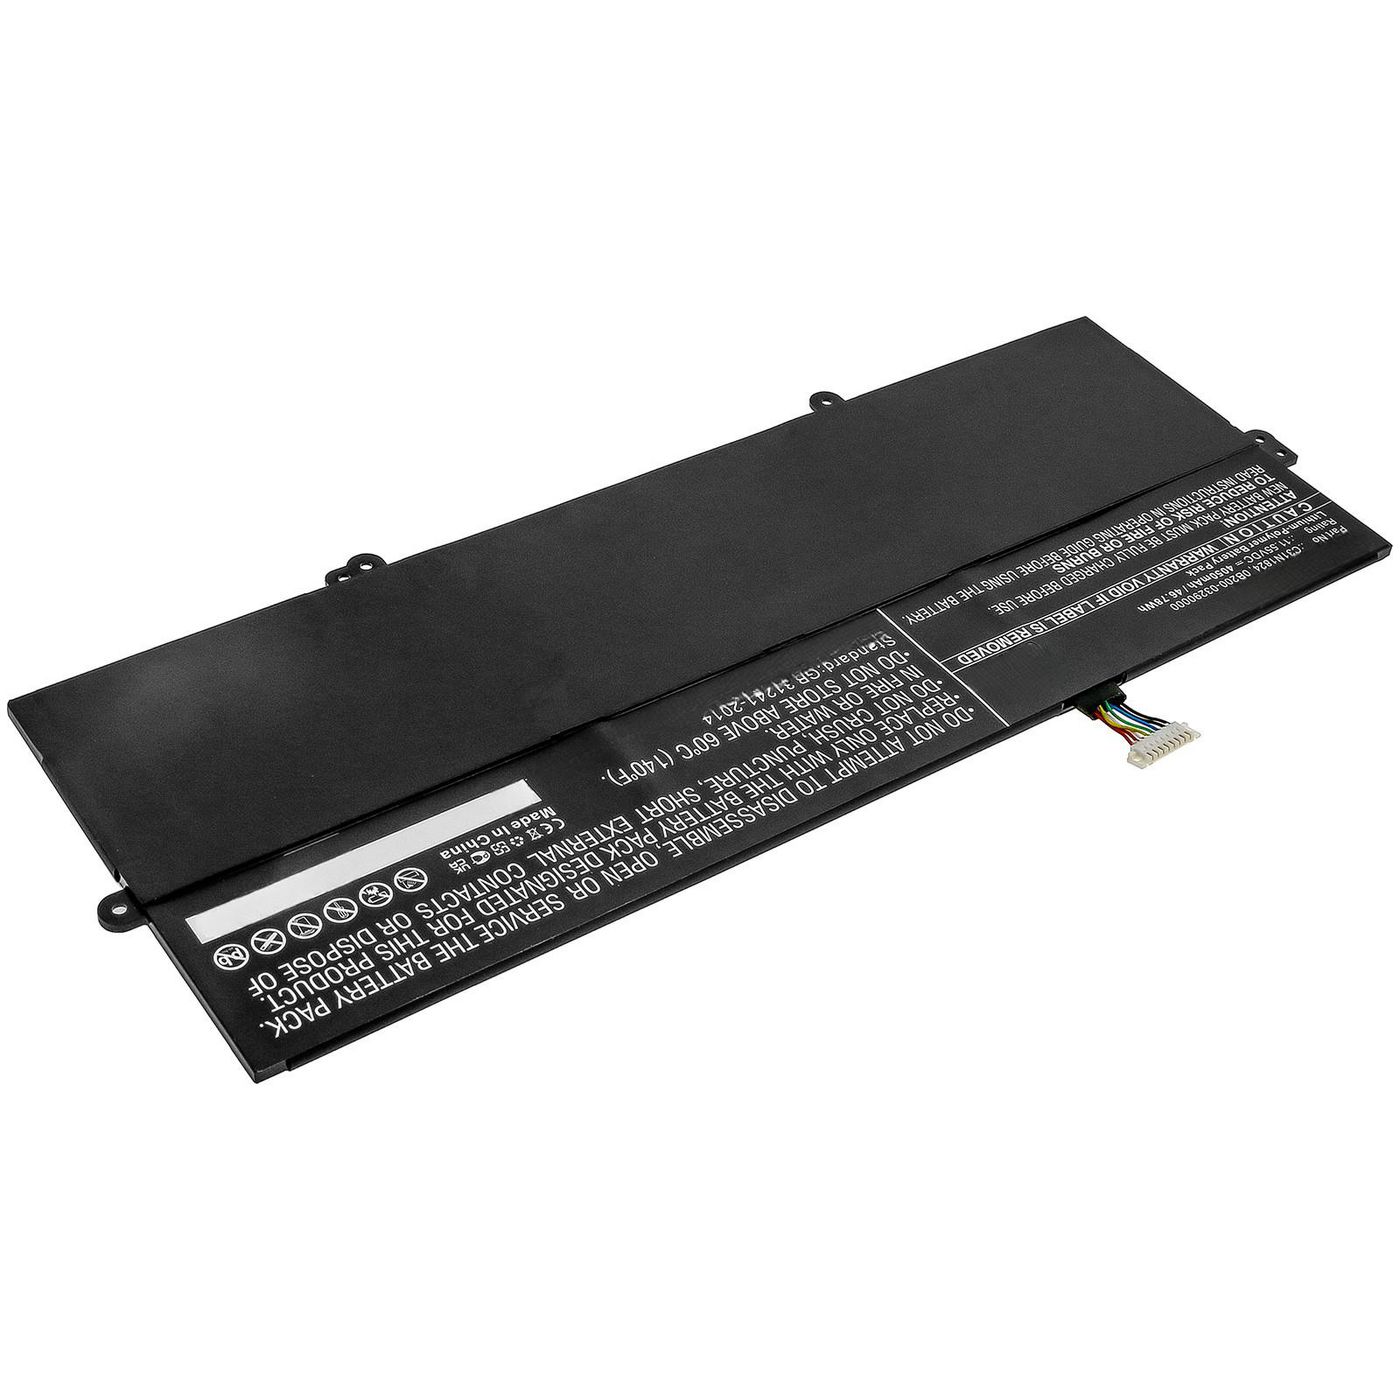 CoreParts MBXAS-BA0259 W126385558 Laptop Battery for Asus 